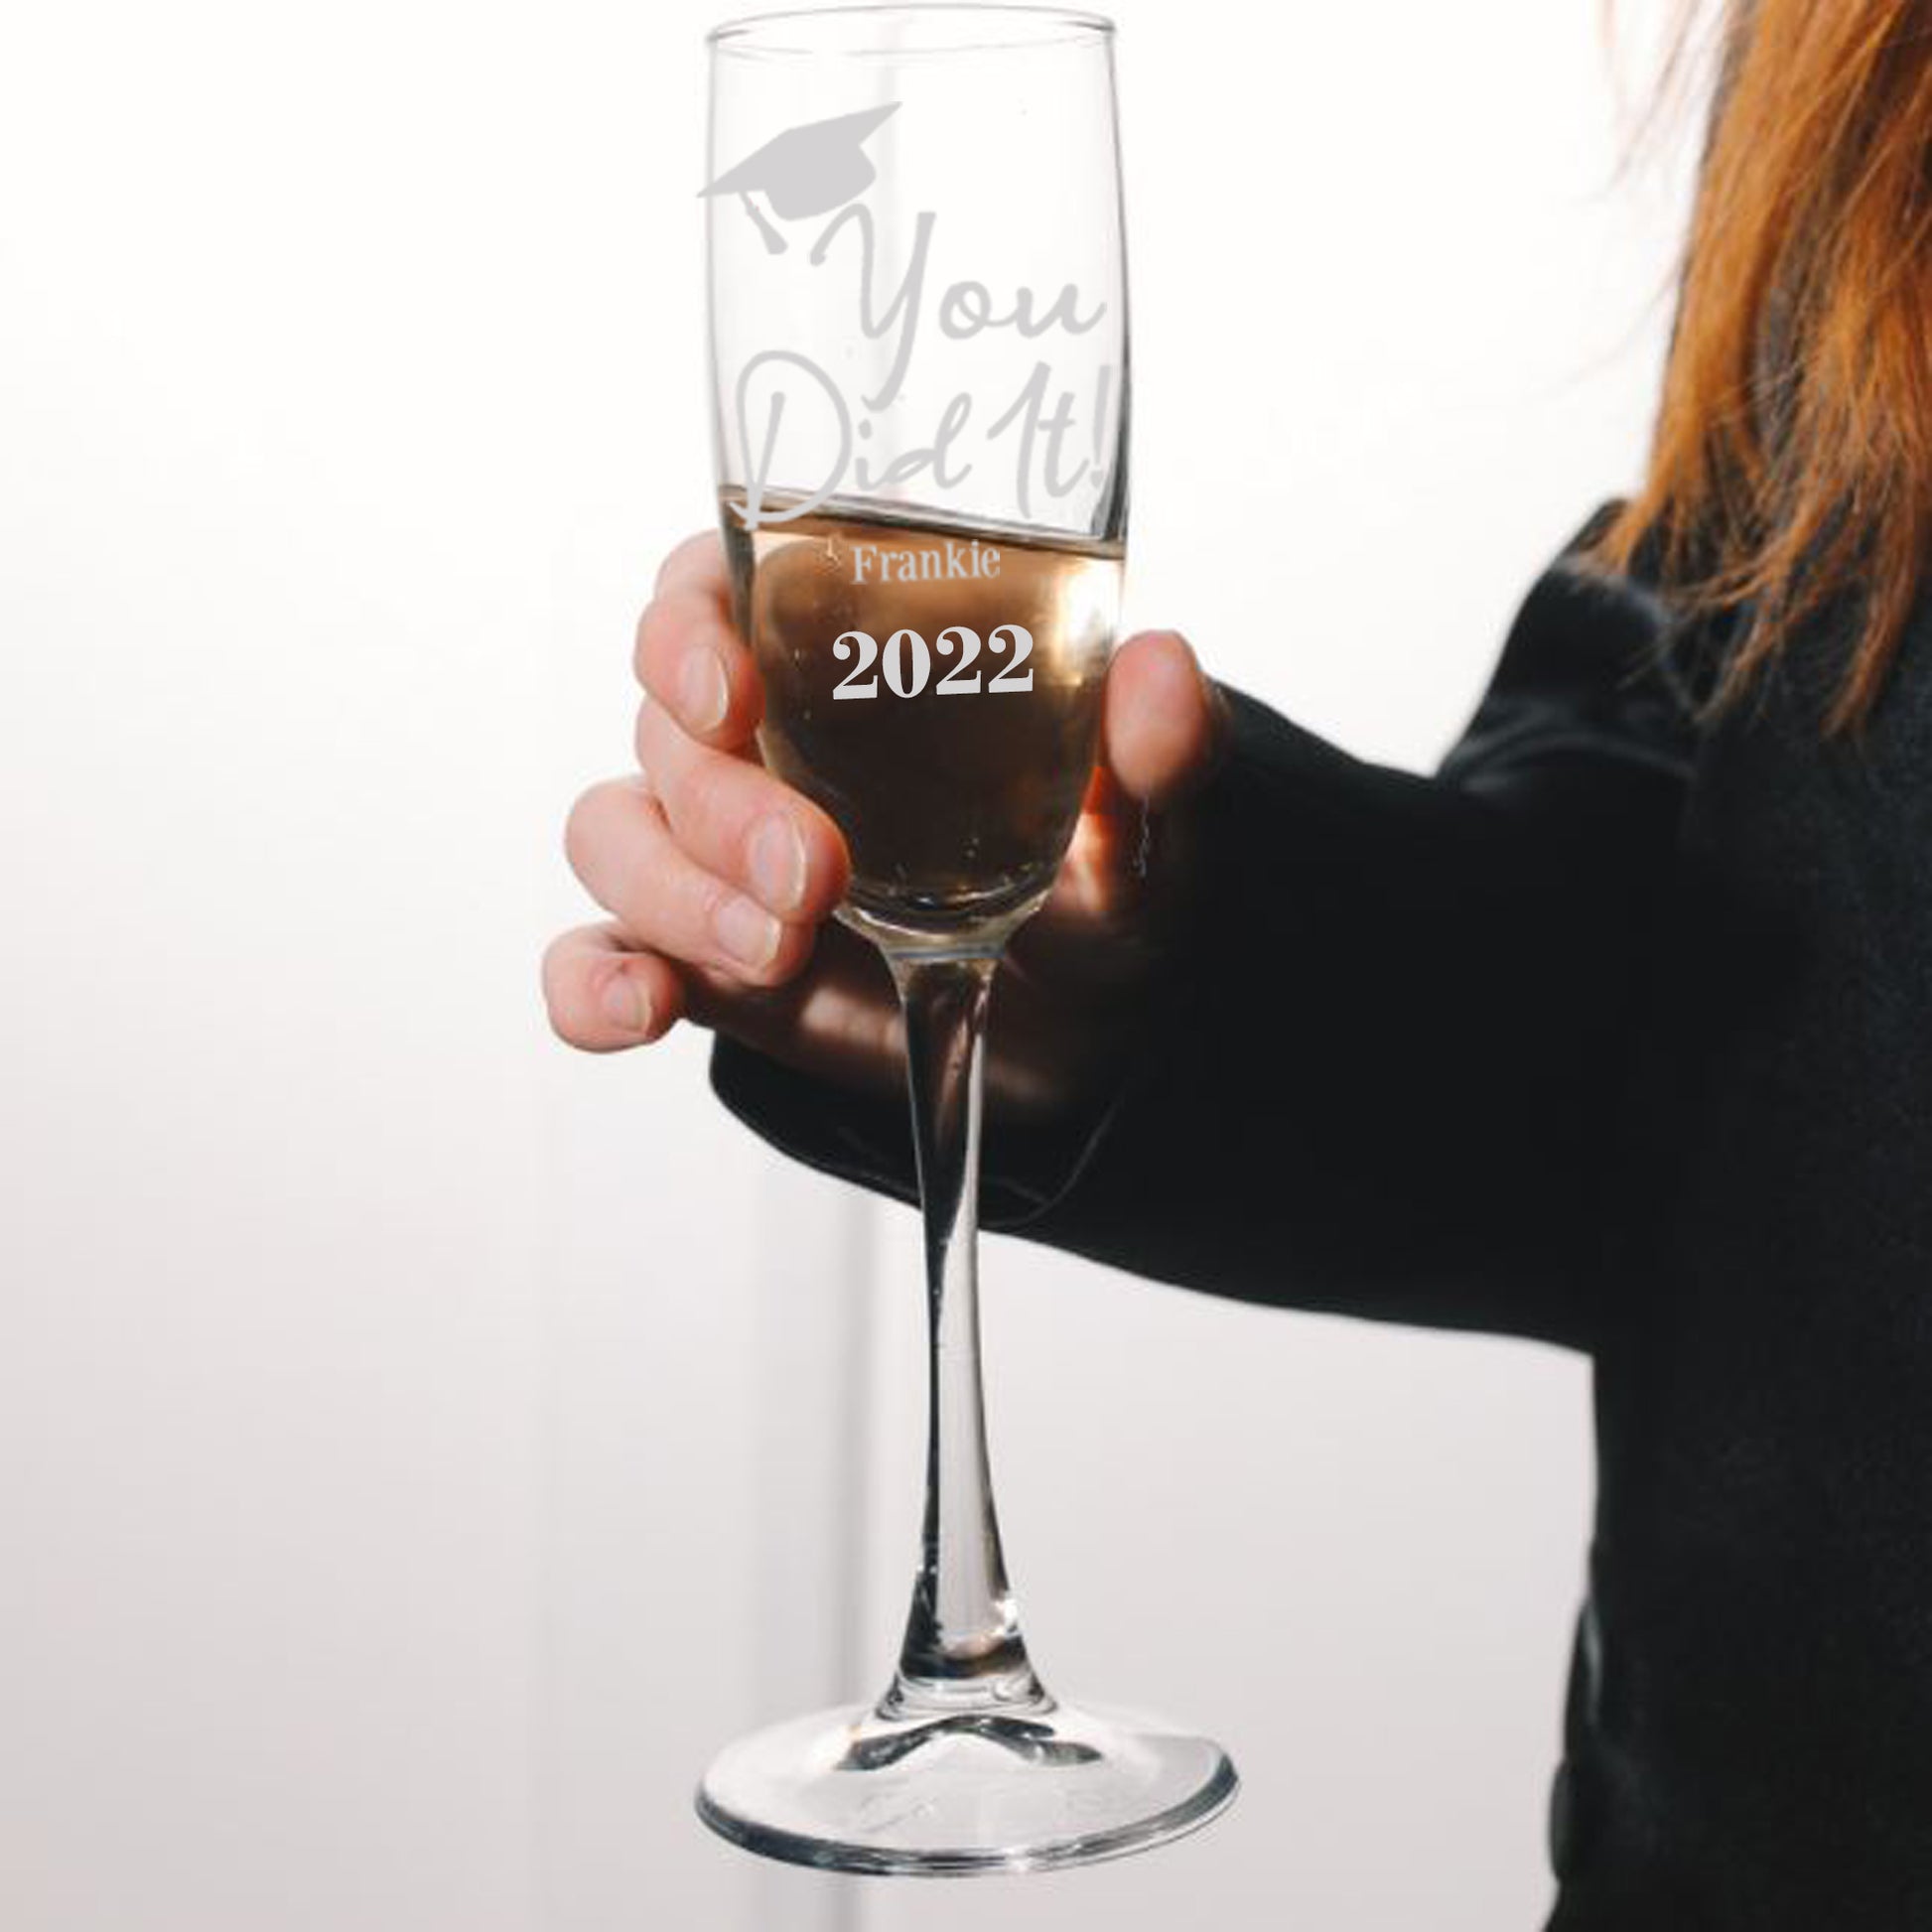 Personalised Engraved Graduation Champagne Flute Glass  - Always Looking Good -   